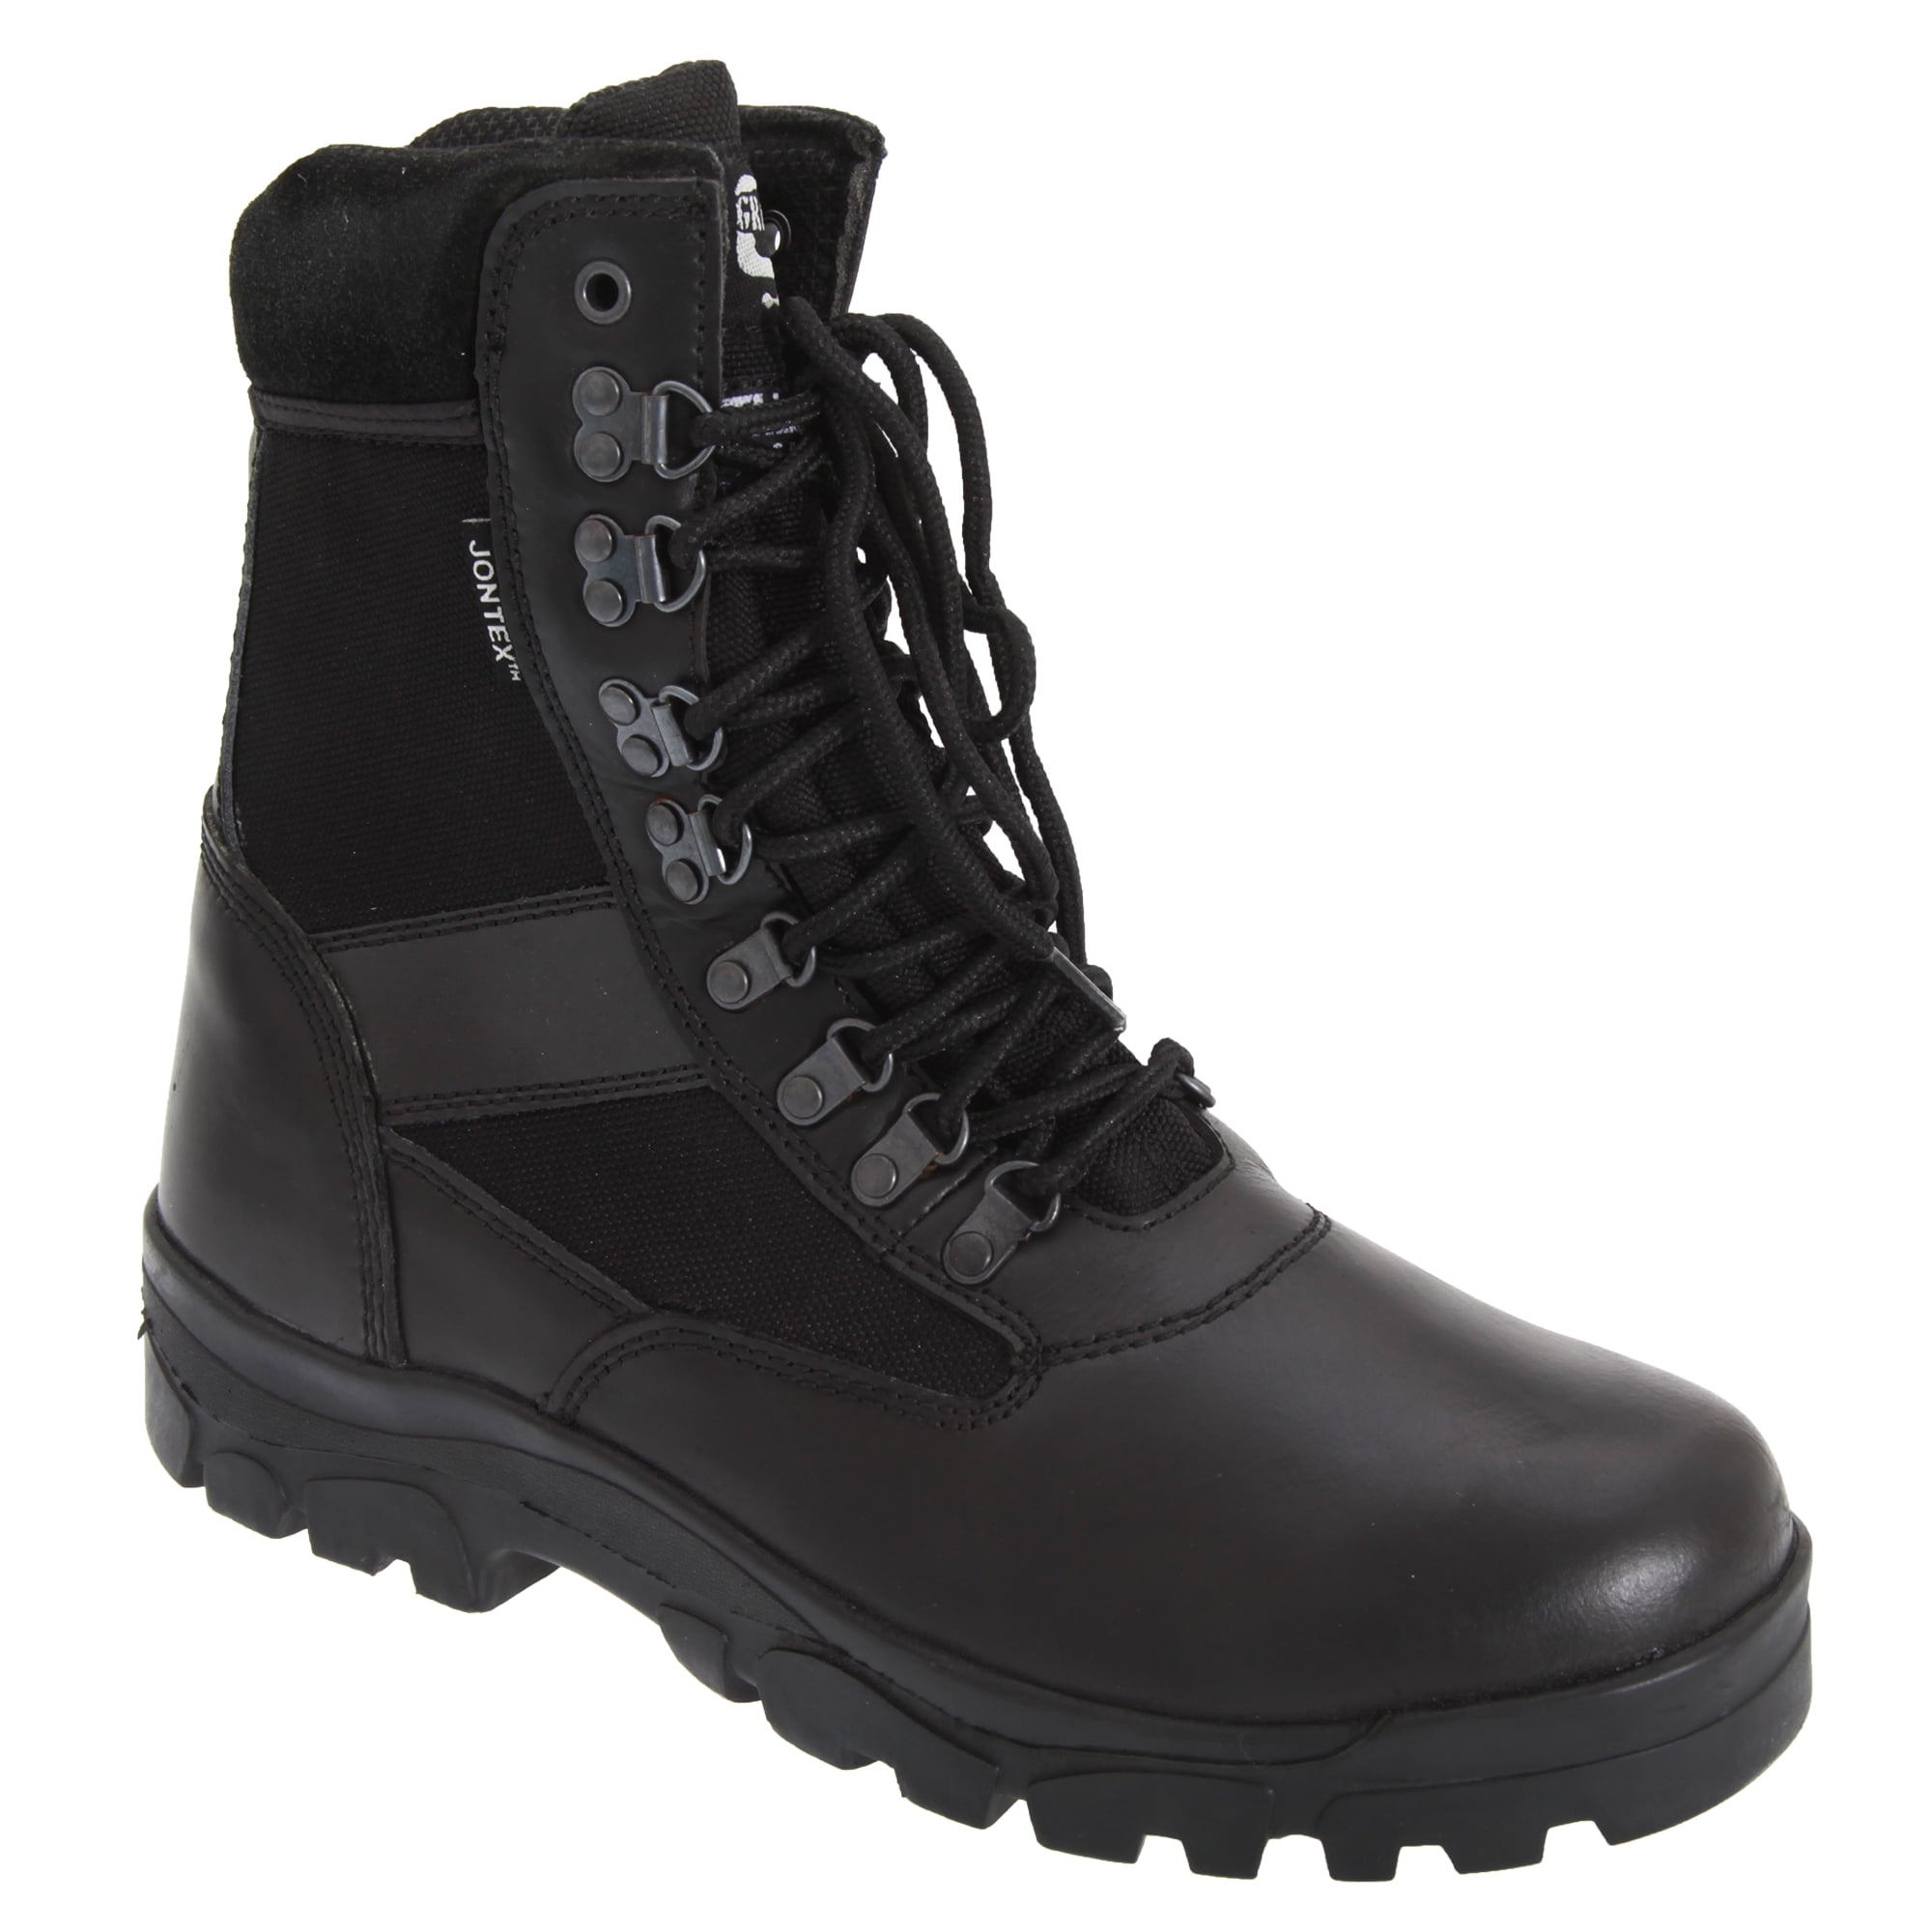 Grafters Mens Combat Boots Army Military Cadet Style Assault Footwear Black 